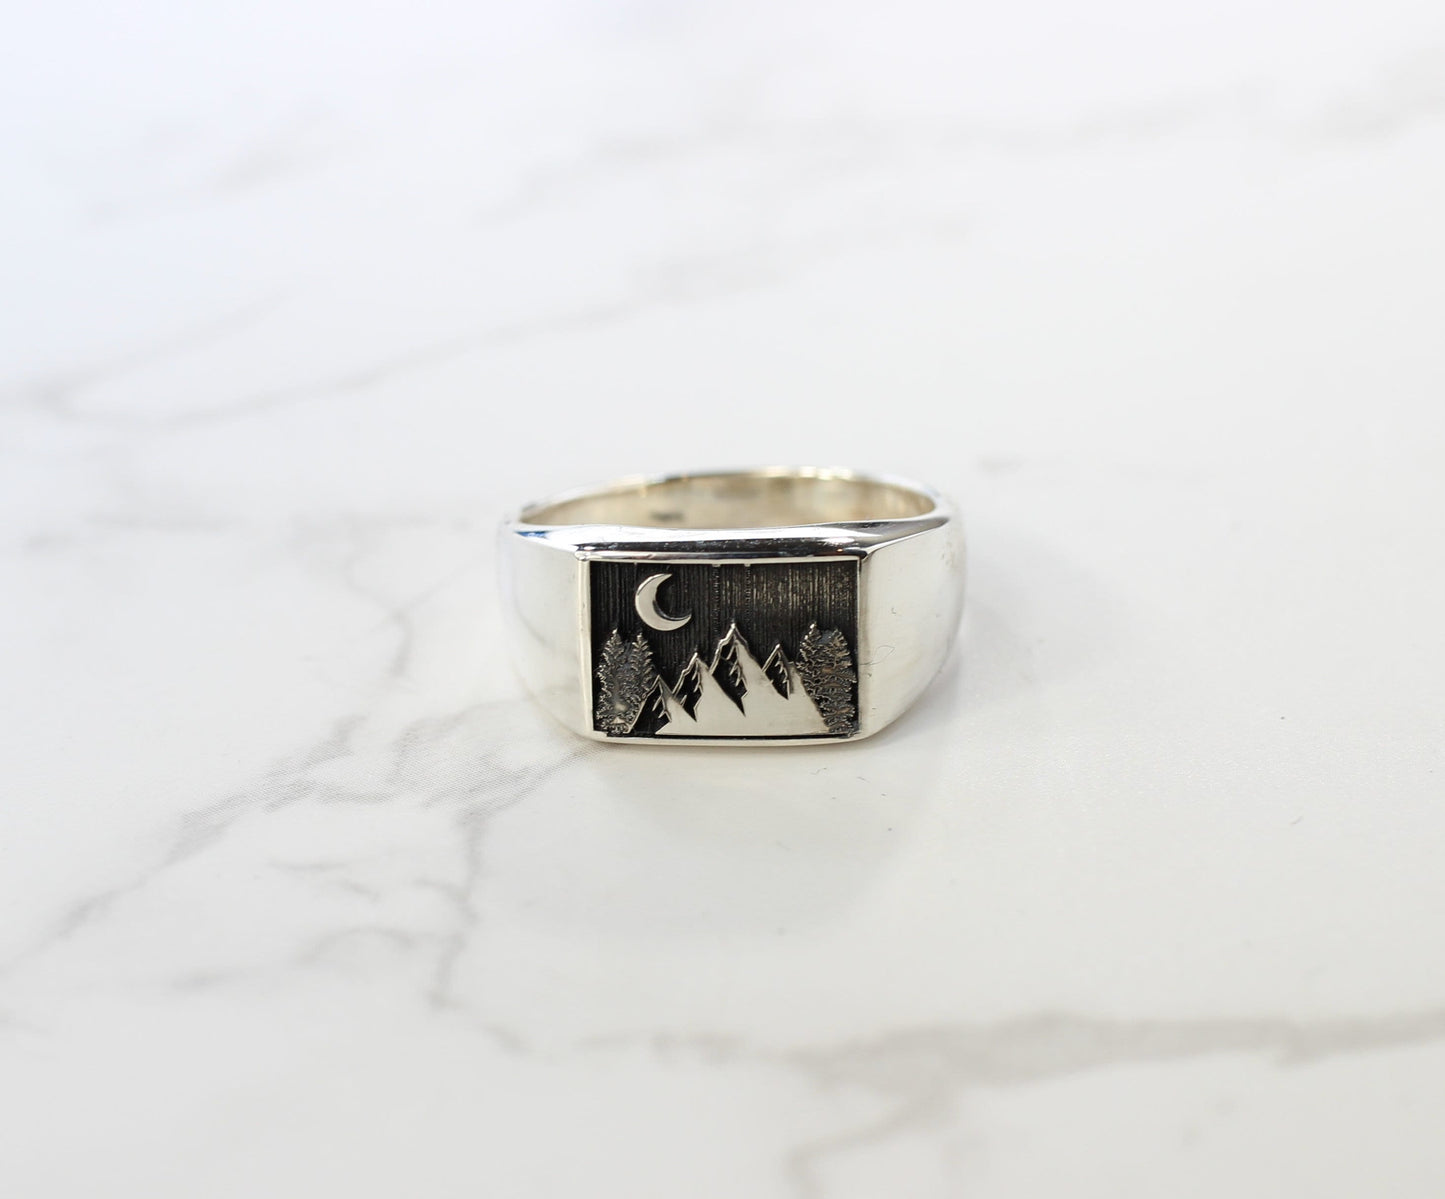 Sterling Silver Mountain Ring // Large Ring with Engraved Mountains and Crescent Moon // Men's Ring